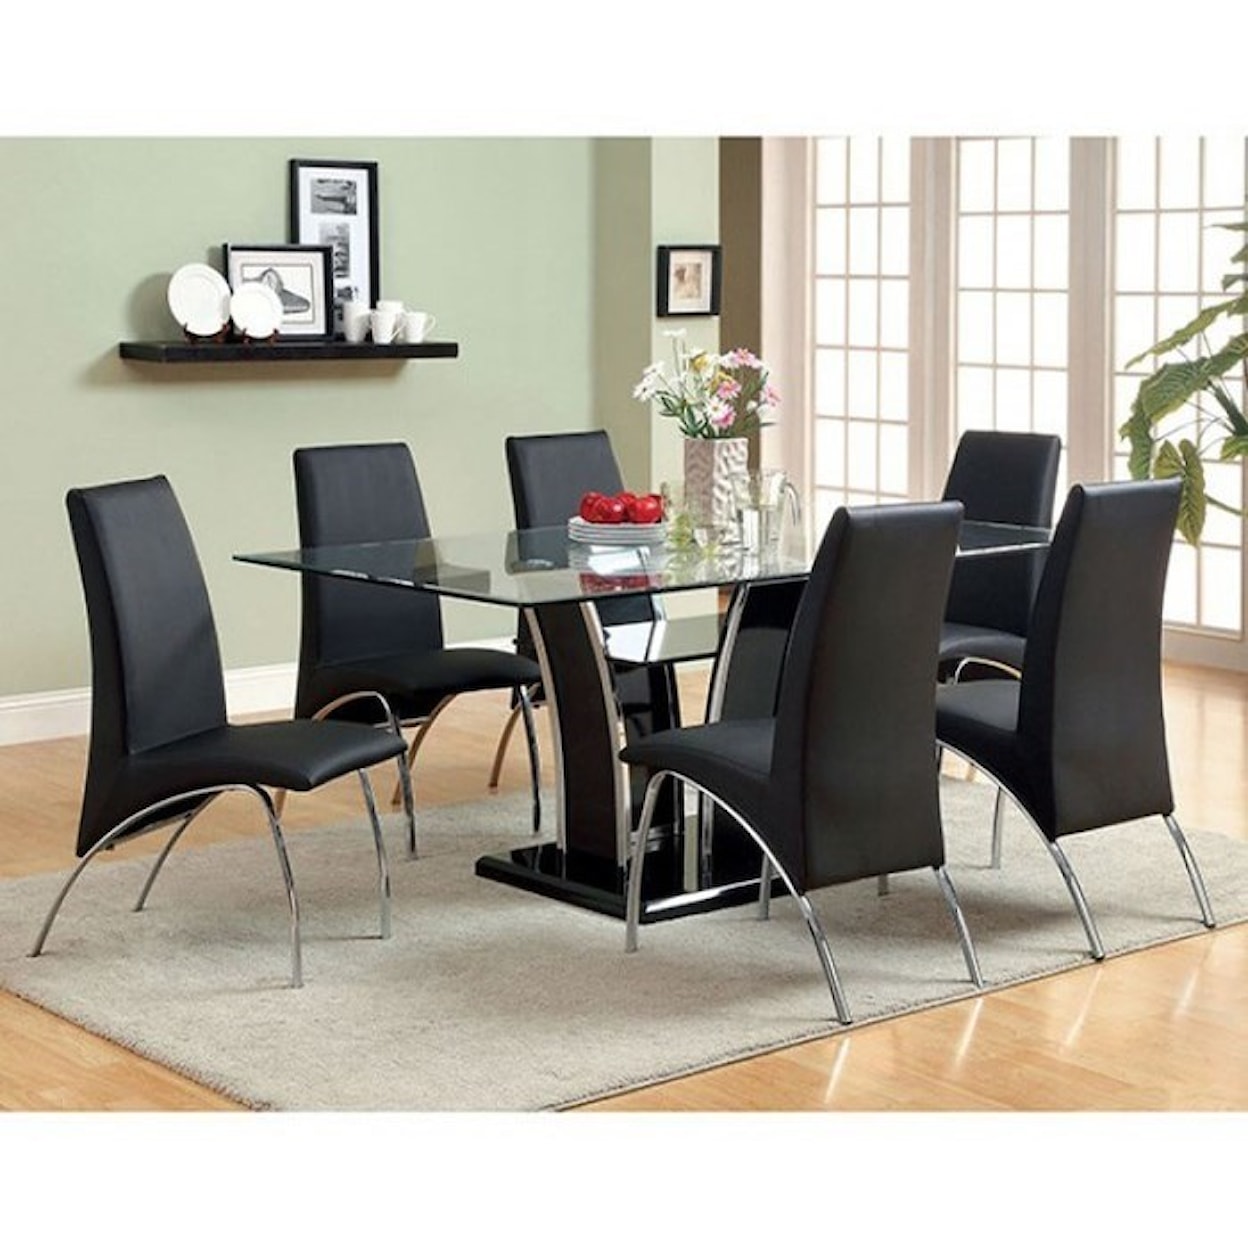 FUSA Glenview Dining Table